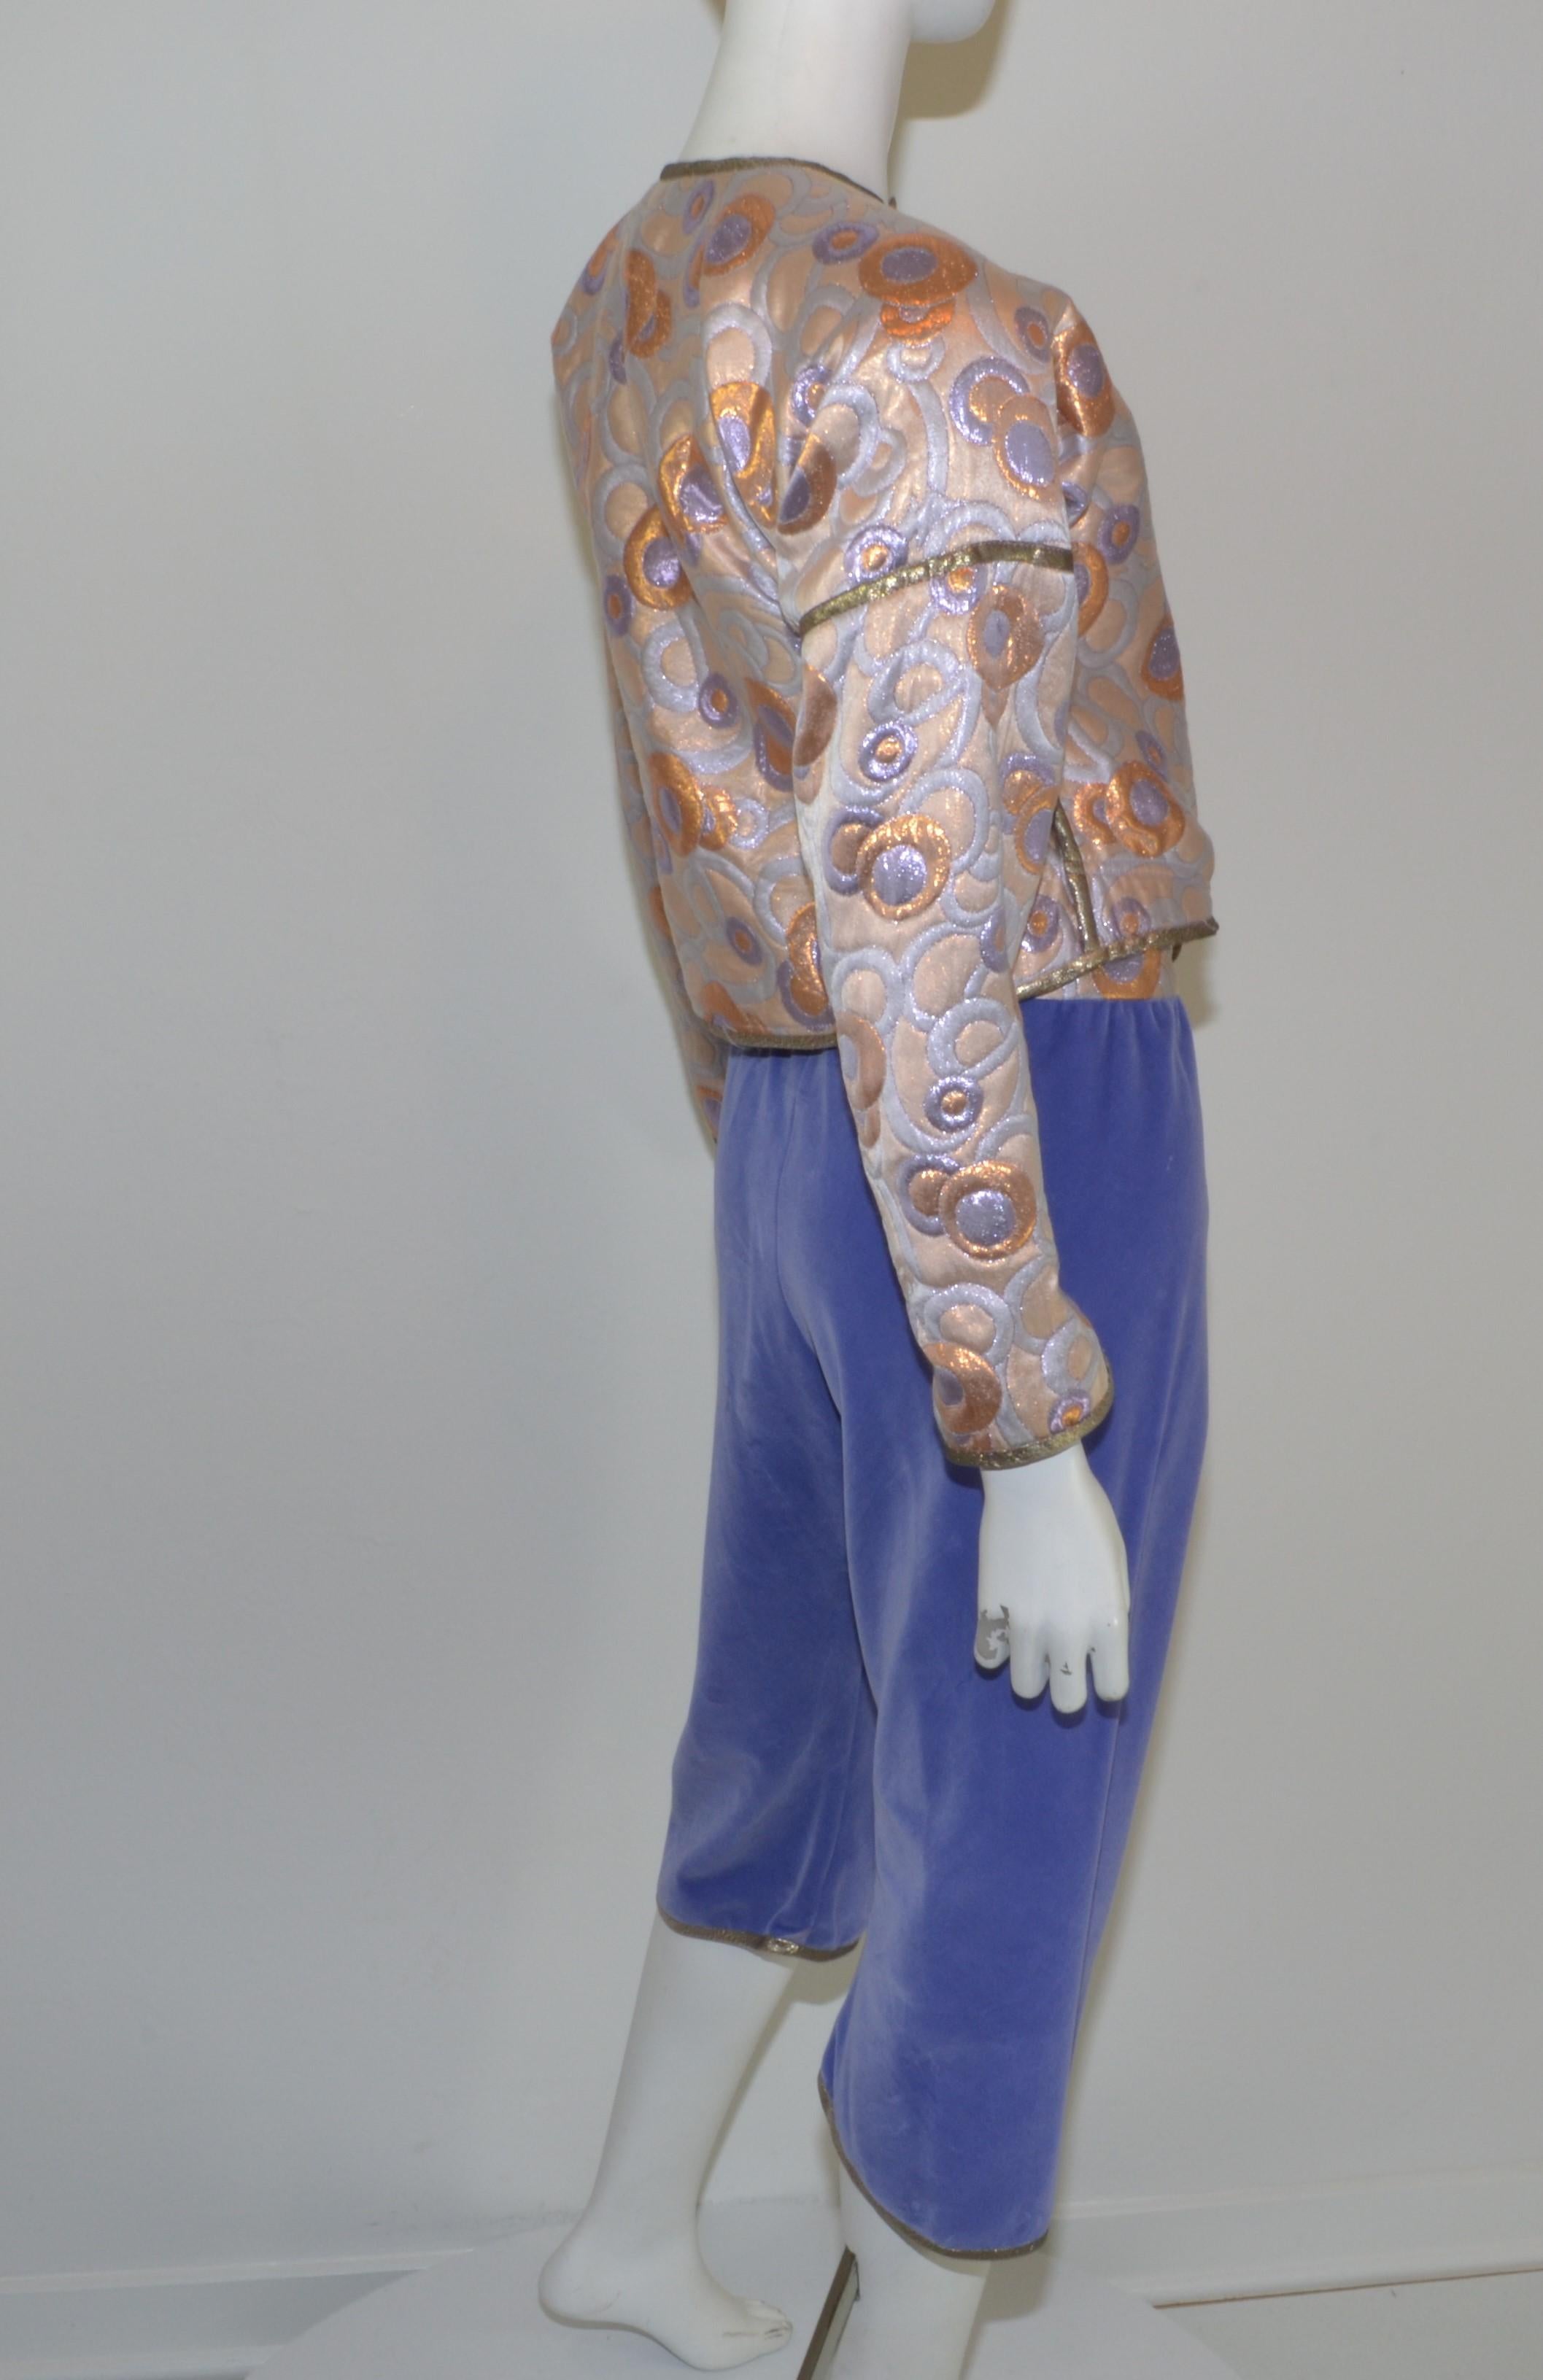 Kaisik Wong 4 Piece Obiko Art to Wear Gaucho Pants Ensemble In Good Condition For Sale In Carmel, CA